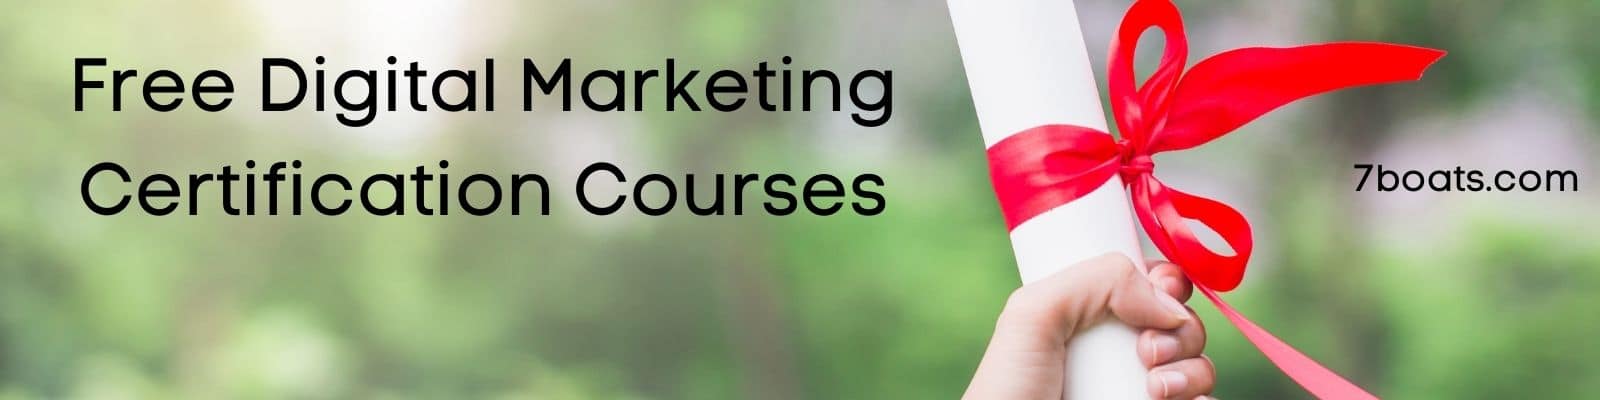 50+ Best Free Online Digital Marketing Certification Programs to boost your CV, Career or Business – Top Free Digital Marketing Courses